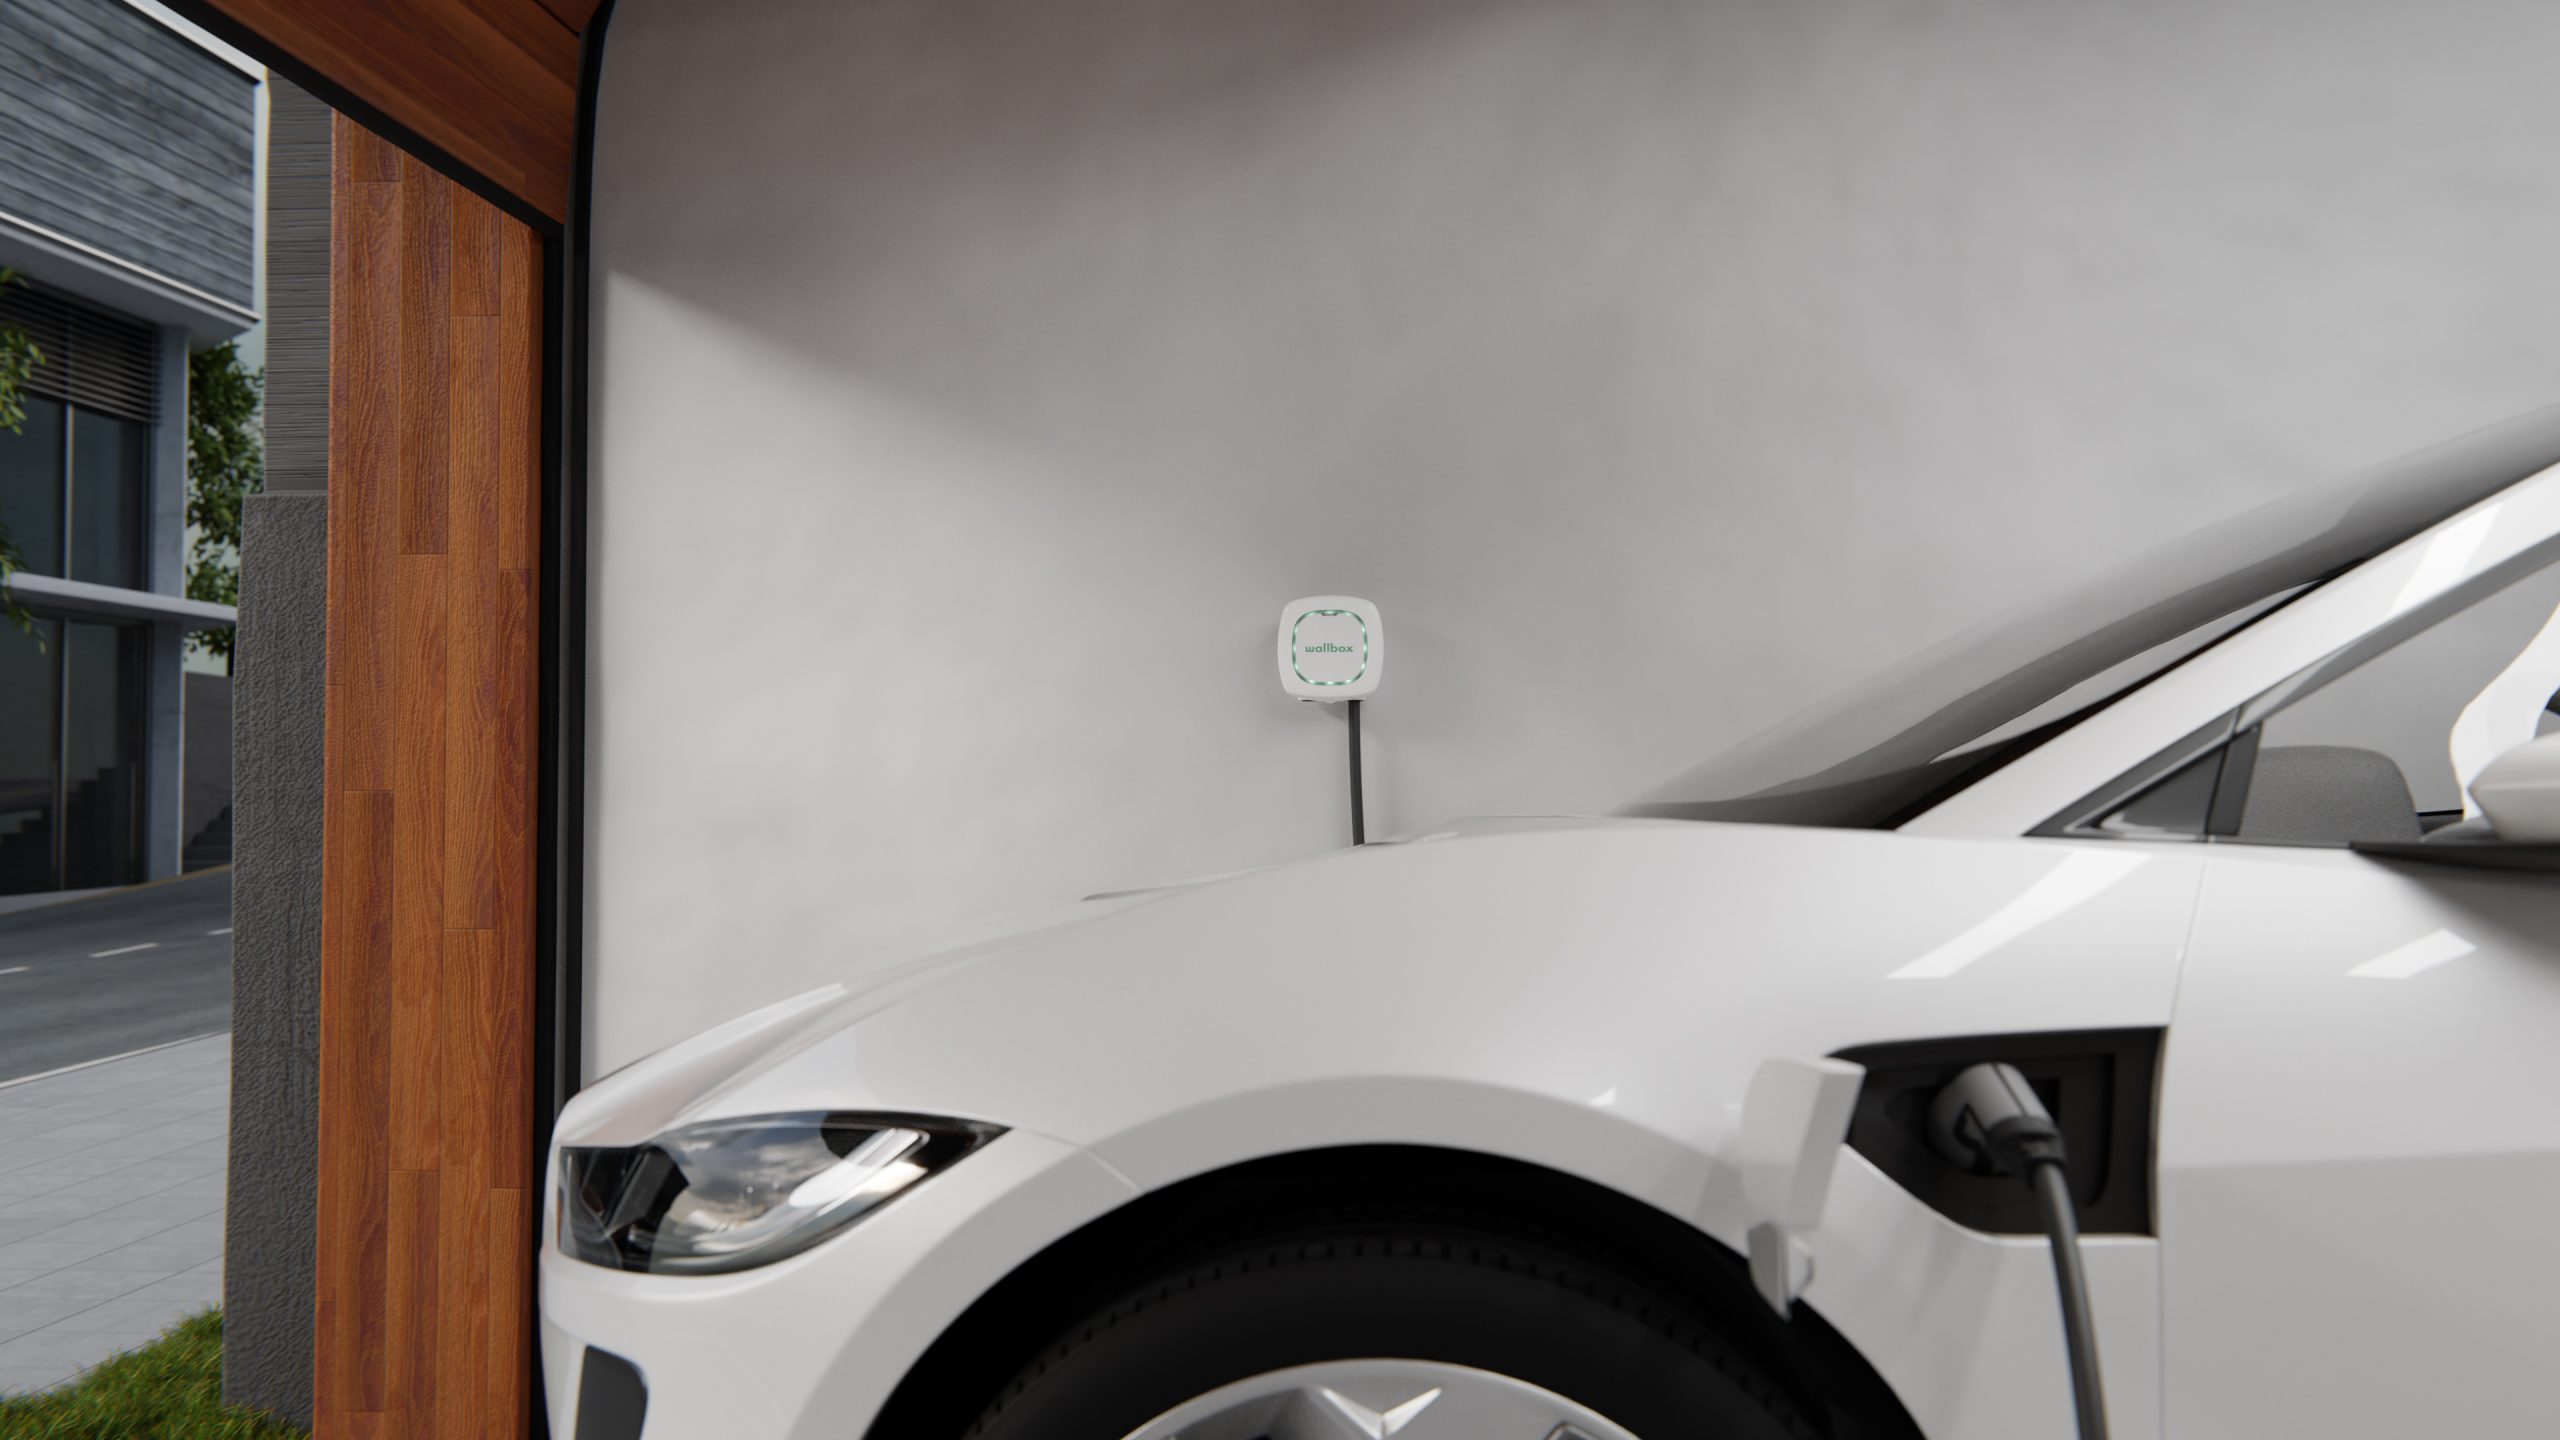 Electric vehicles home charger